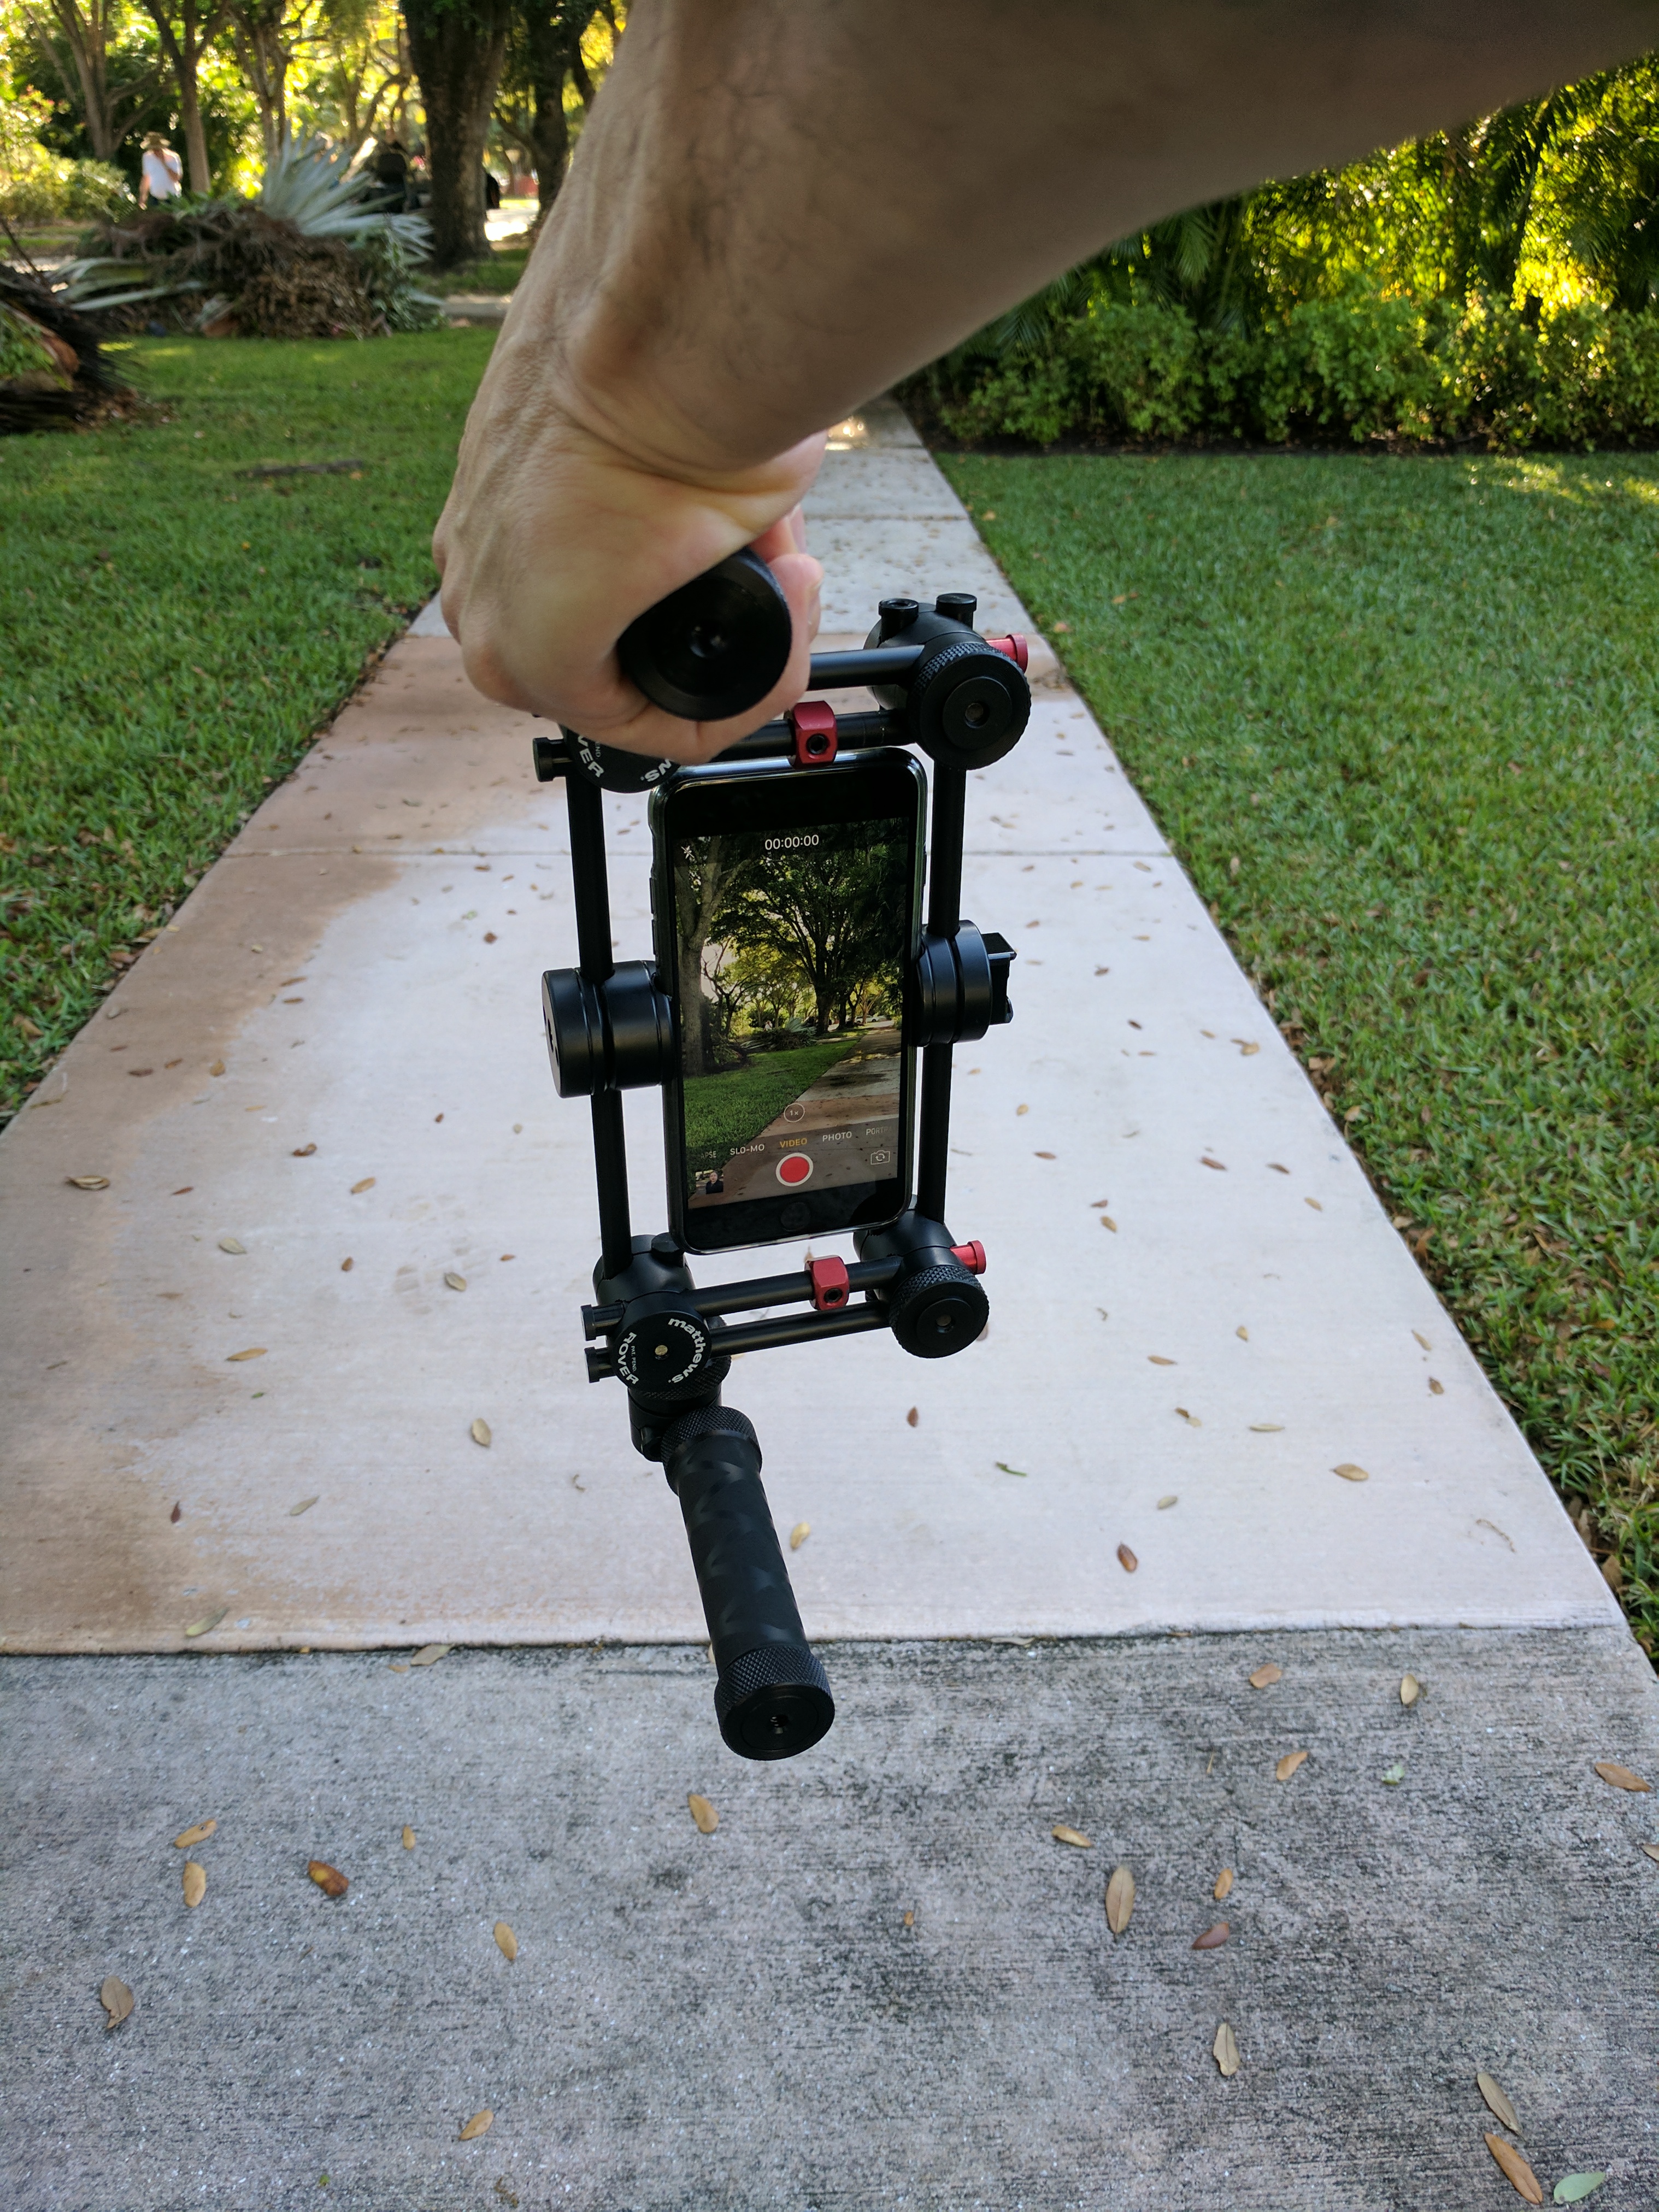 Rover: a higher priced iOgrapher/Padcaster type device 14